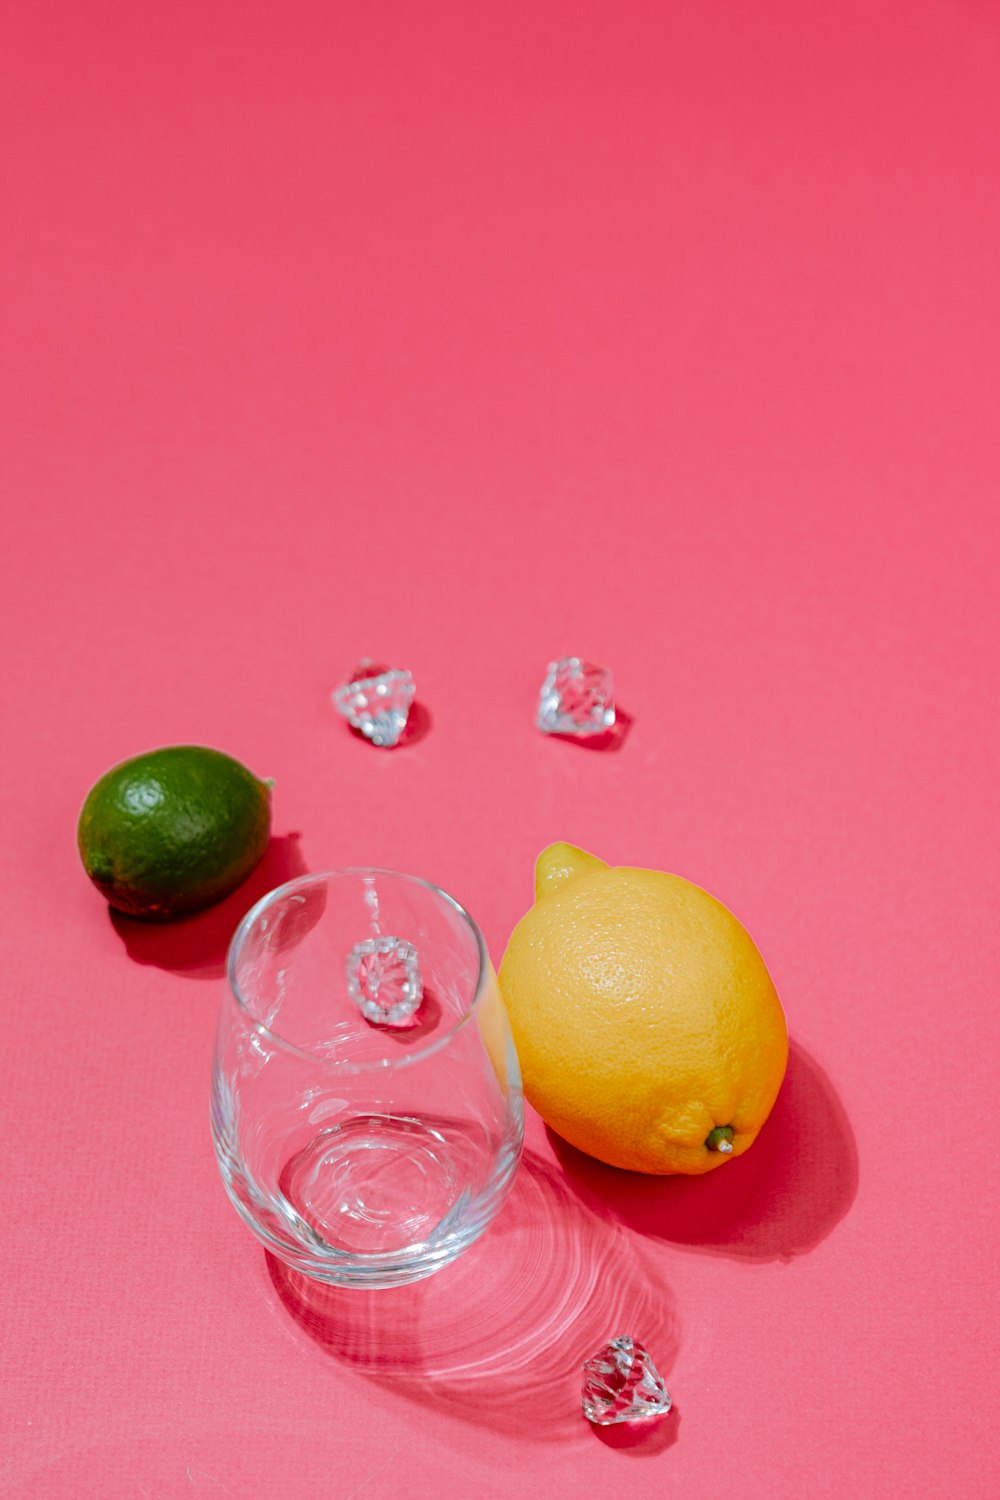 a lemon and a glass of water on a pink surface